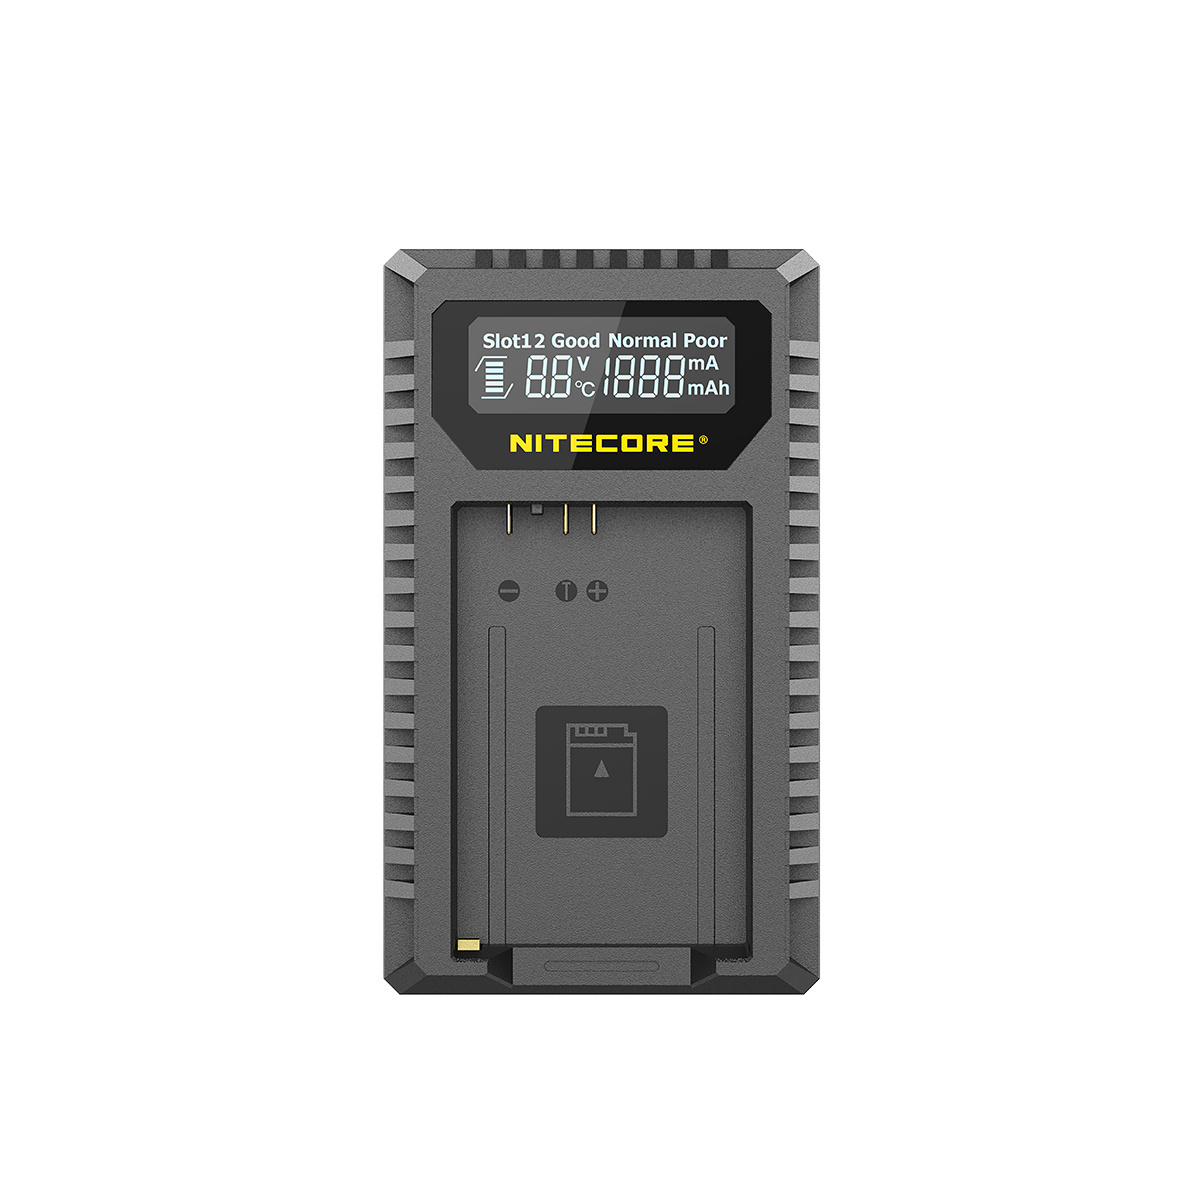 Nitecore UCN5 USB Charger for LP-E17 Batteries